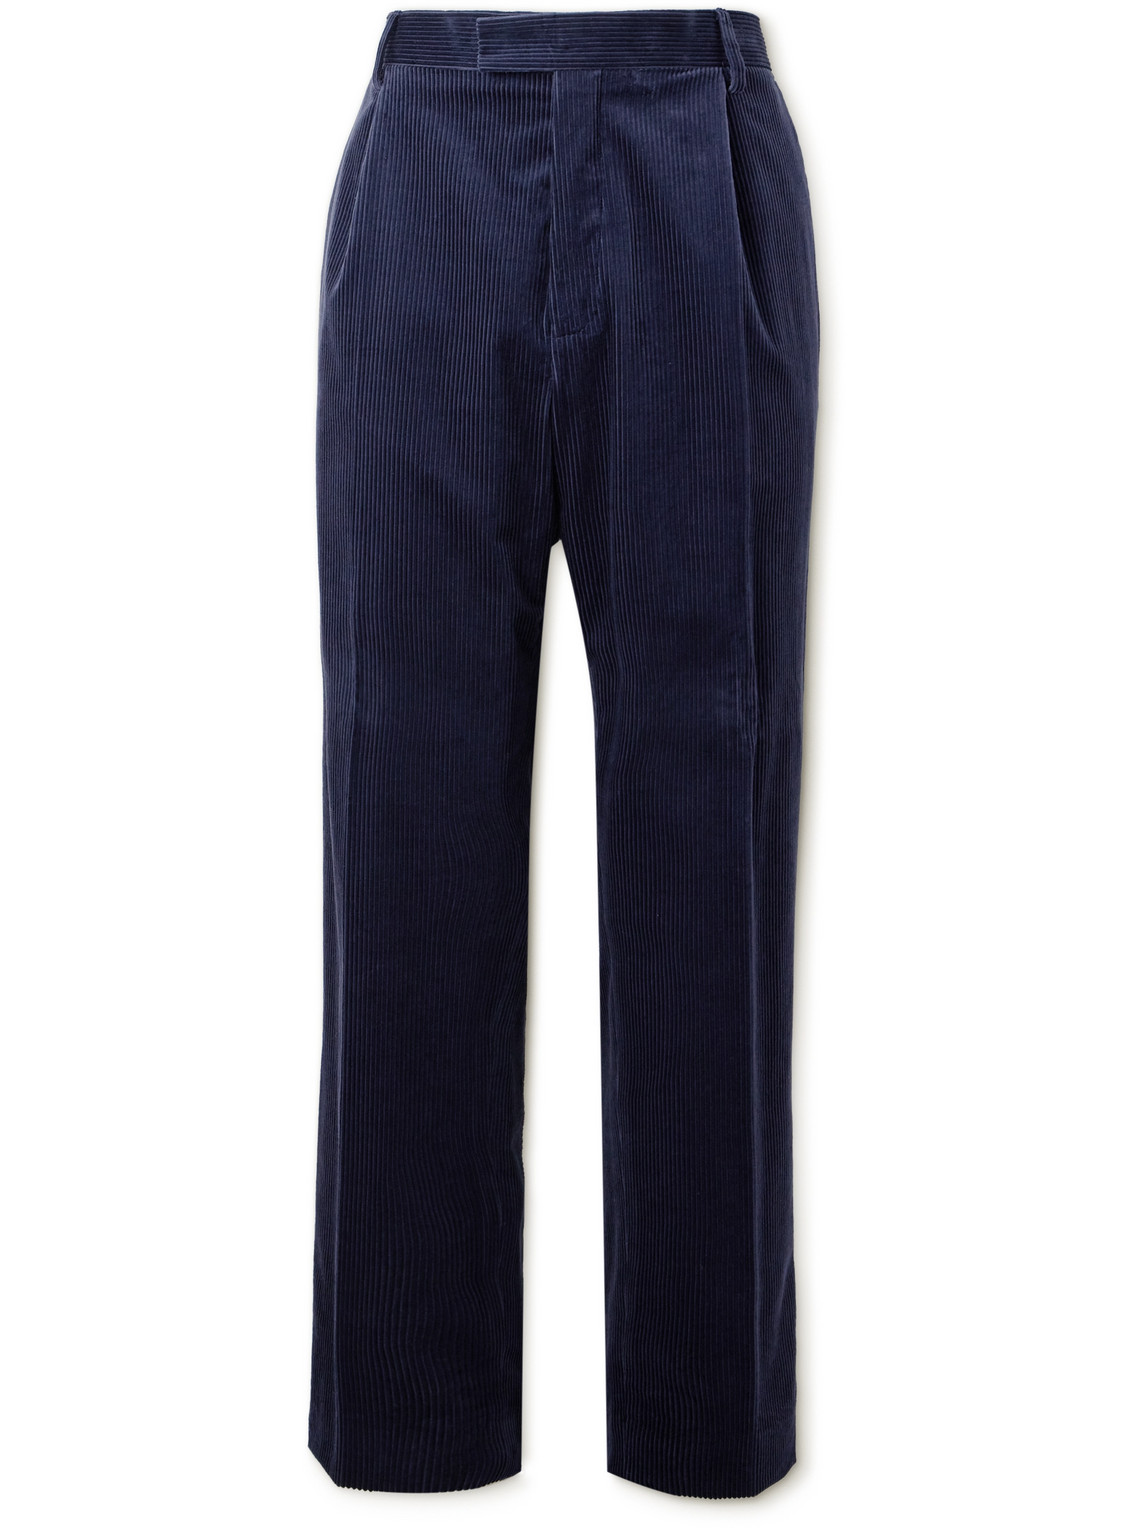 Mr P. - Tapered Pleated Cotton and Cashmere-Blend Corduroy Trousers - Men - Blue - 28 von Mr P.